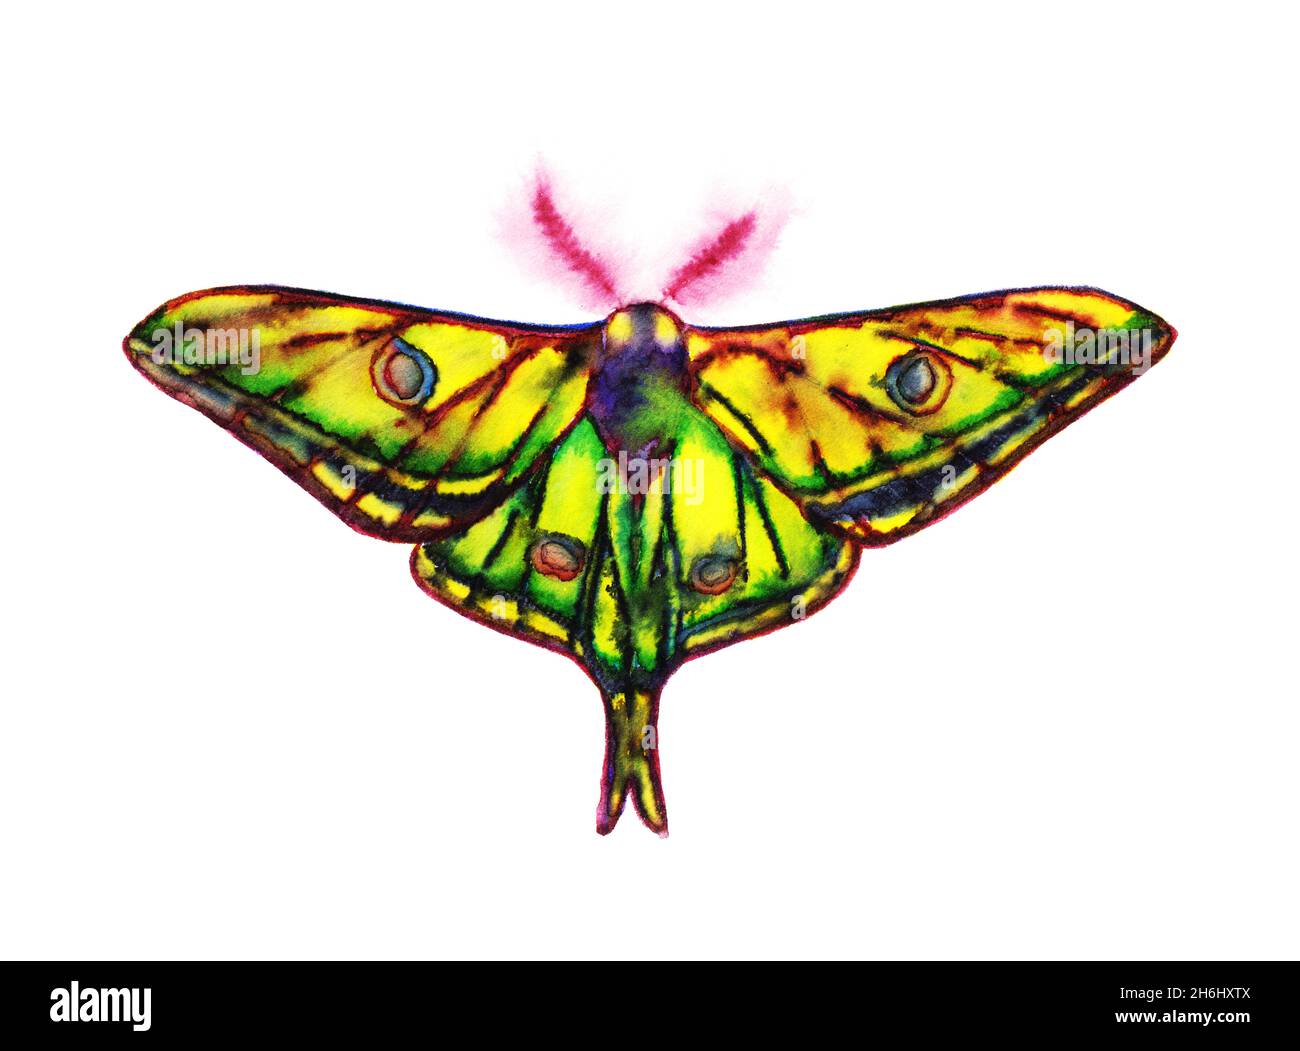 Graellsia isabellae, the Spanish moon moth in color ink on white background Stock Photo